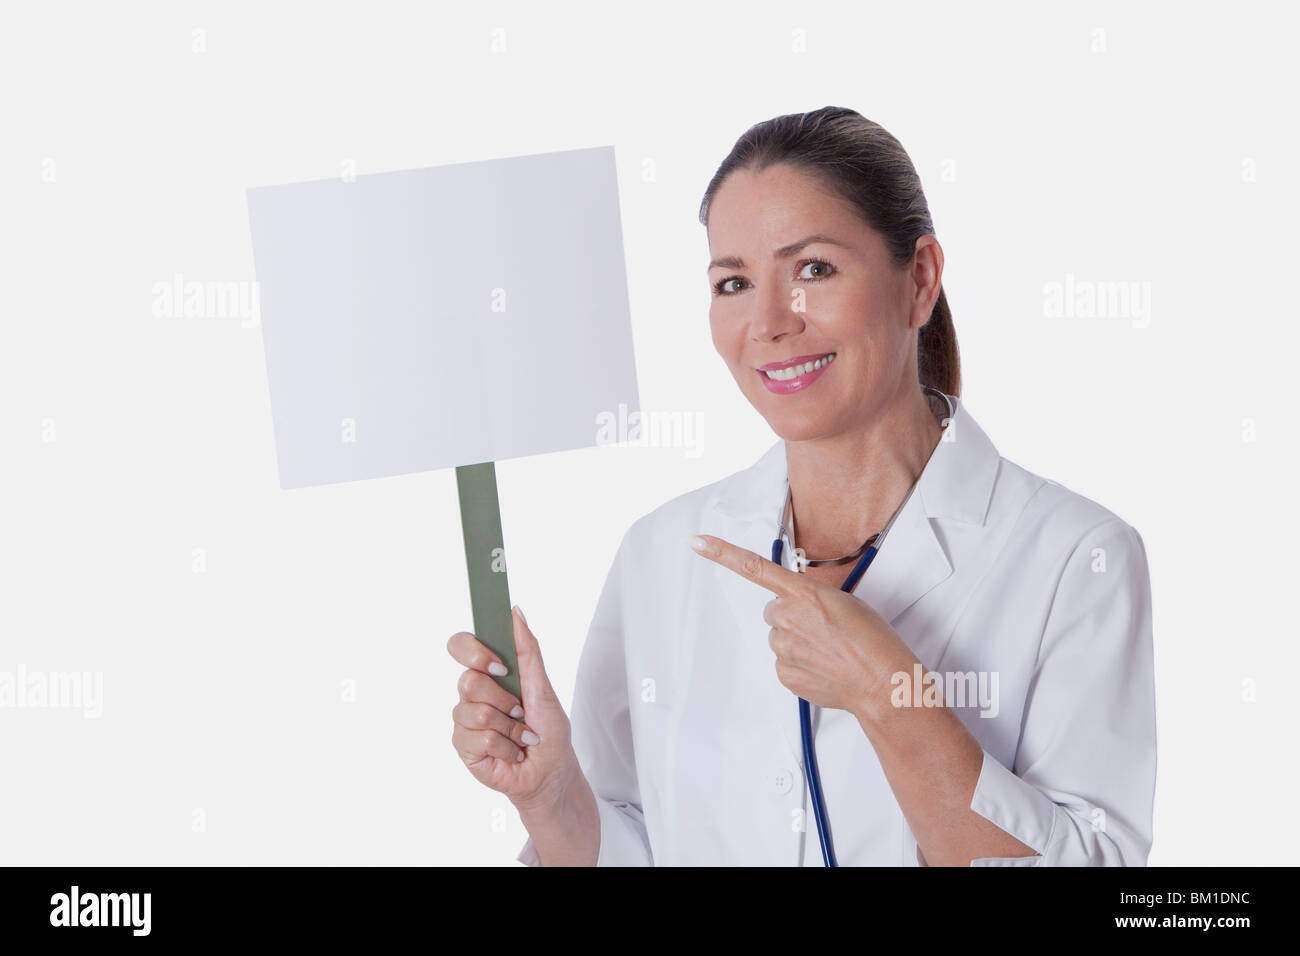 Female doctor holding a blank placard Stock Photo